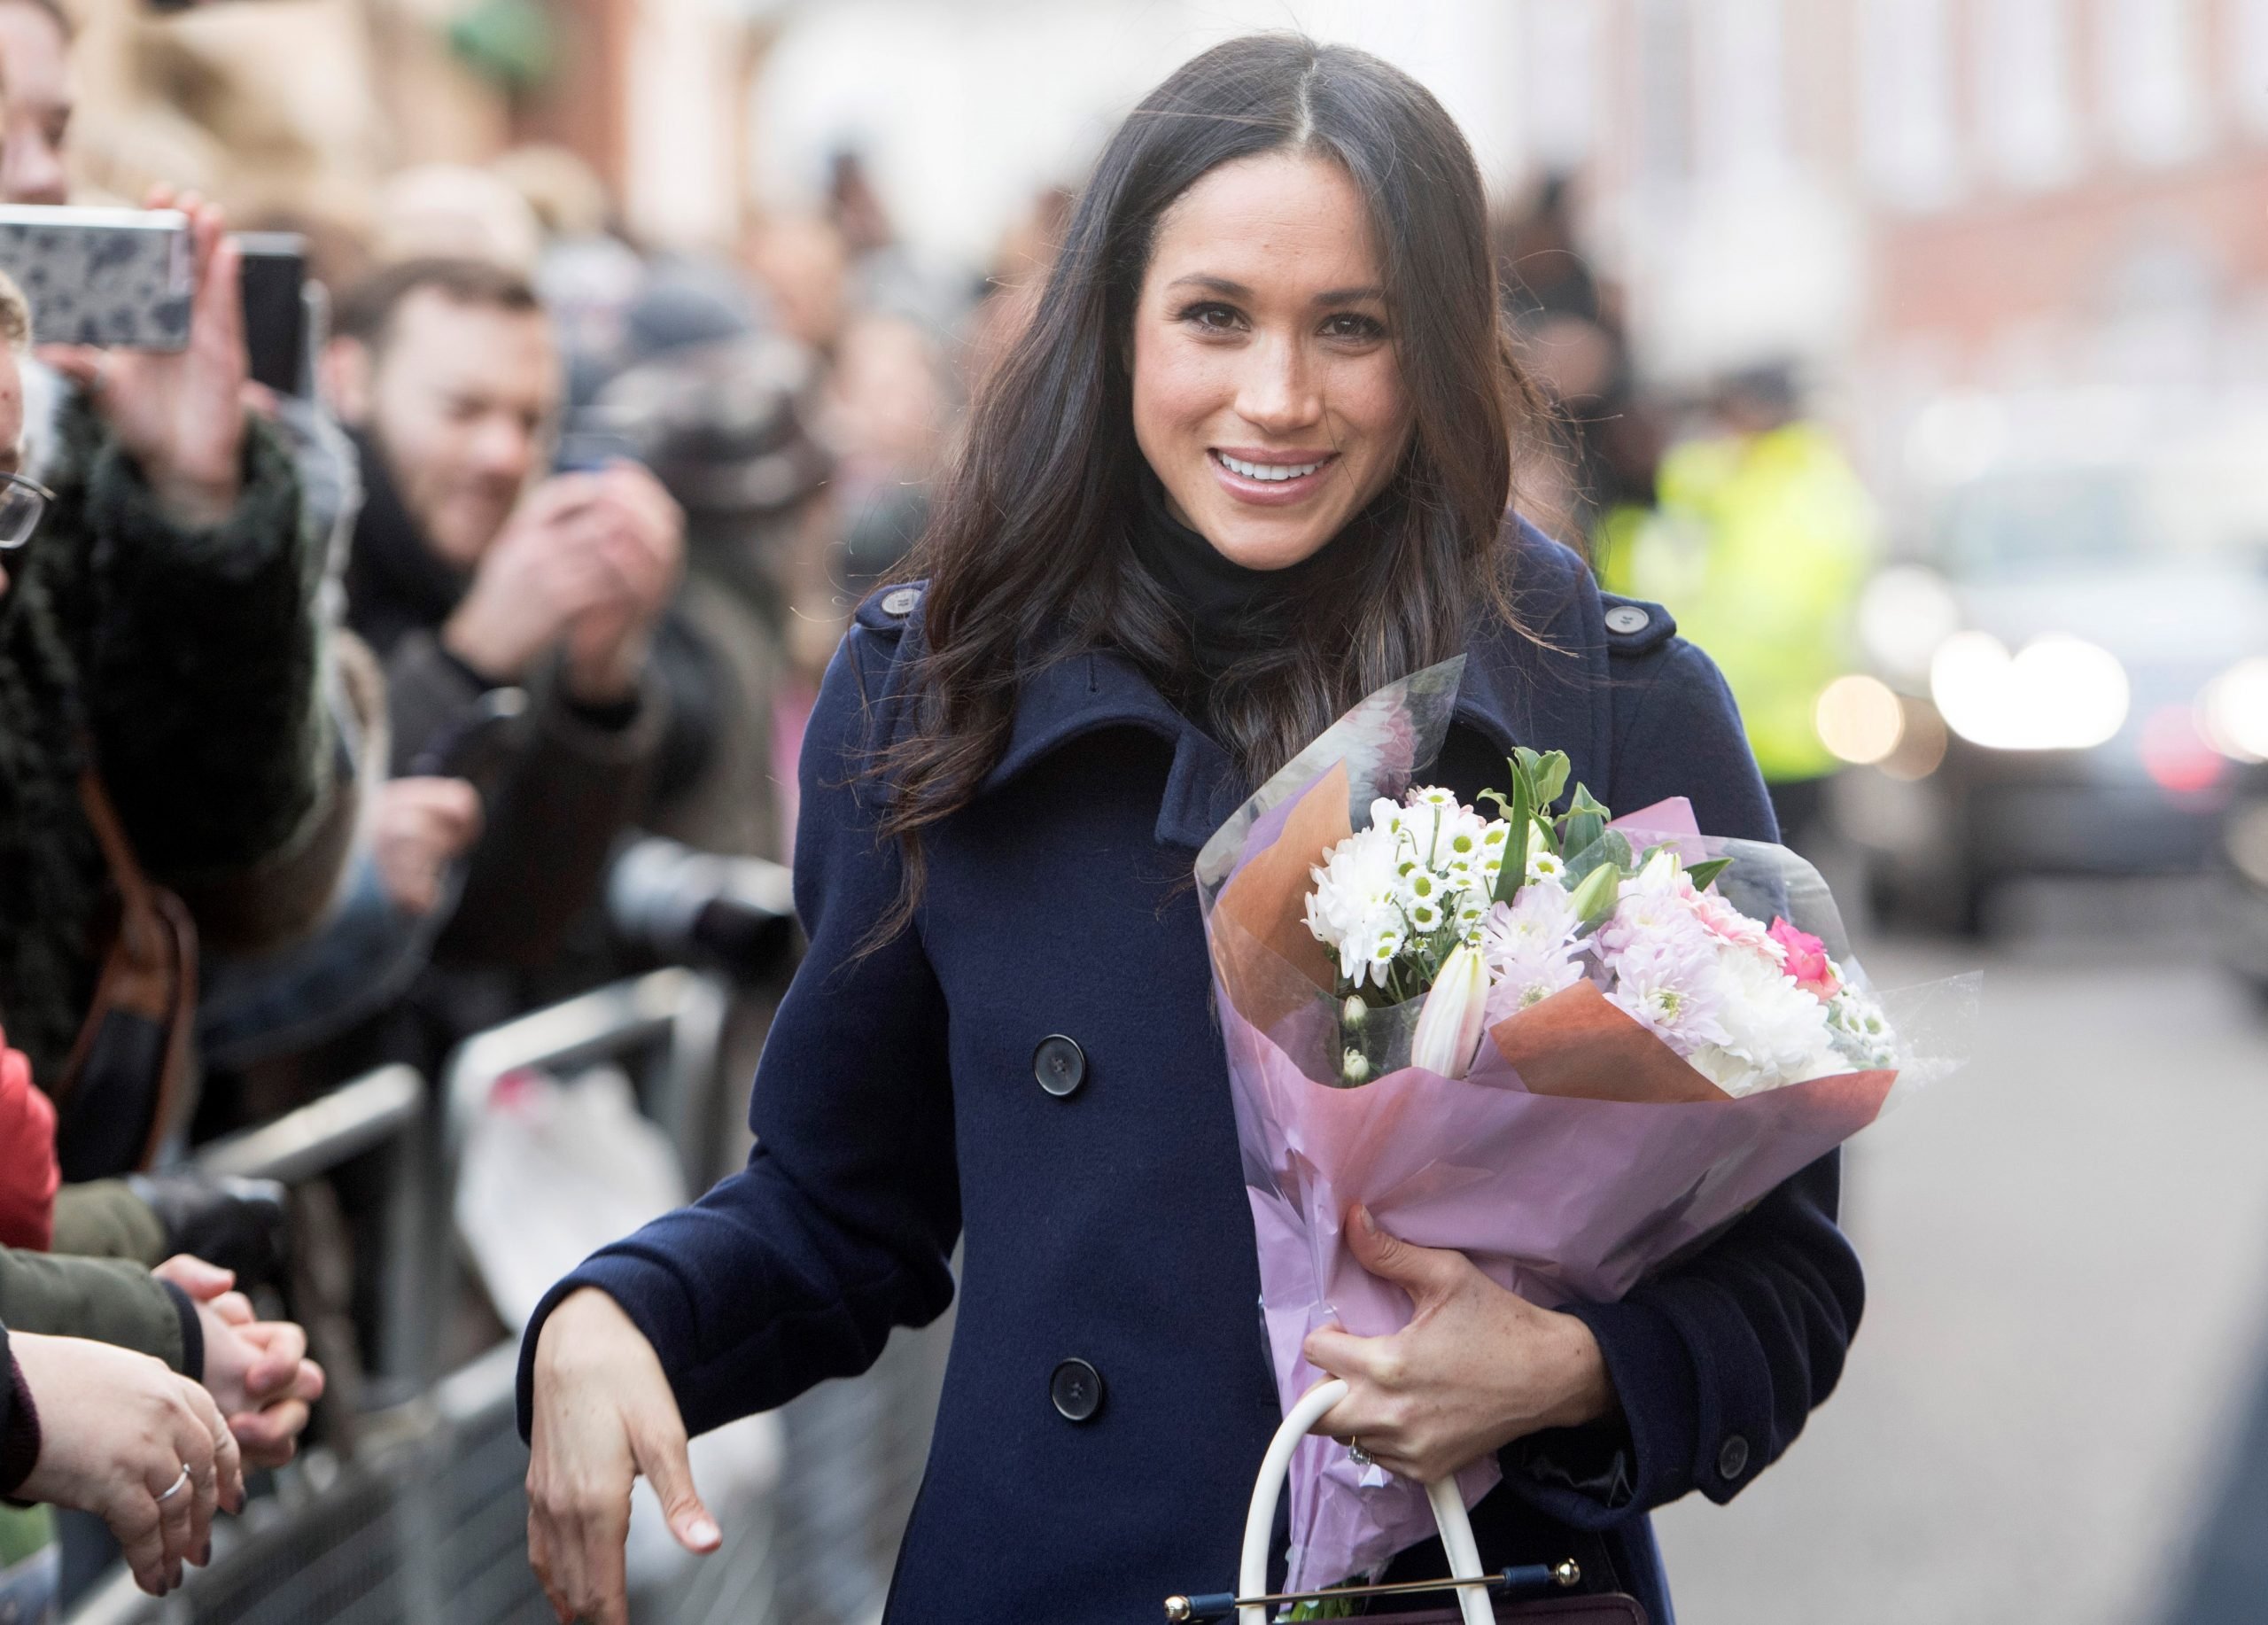 Meghan Markle holding a bouquet of flowers in Nottingham on her first official public engagement